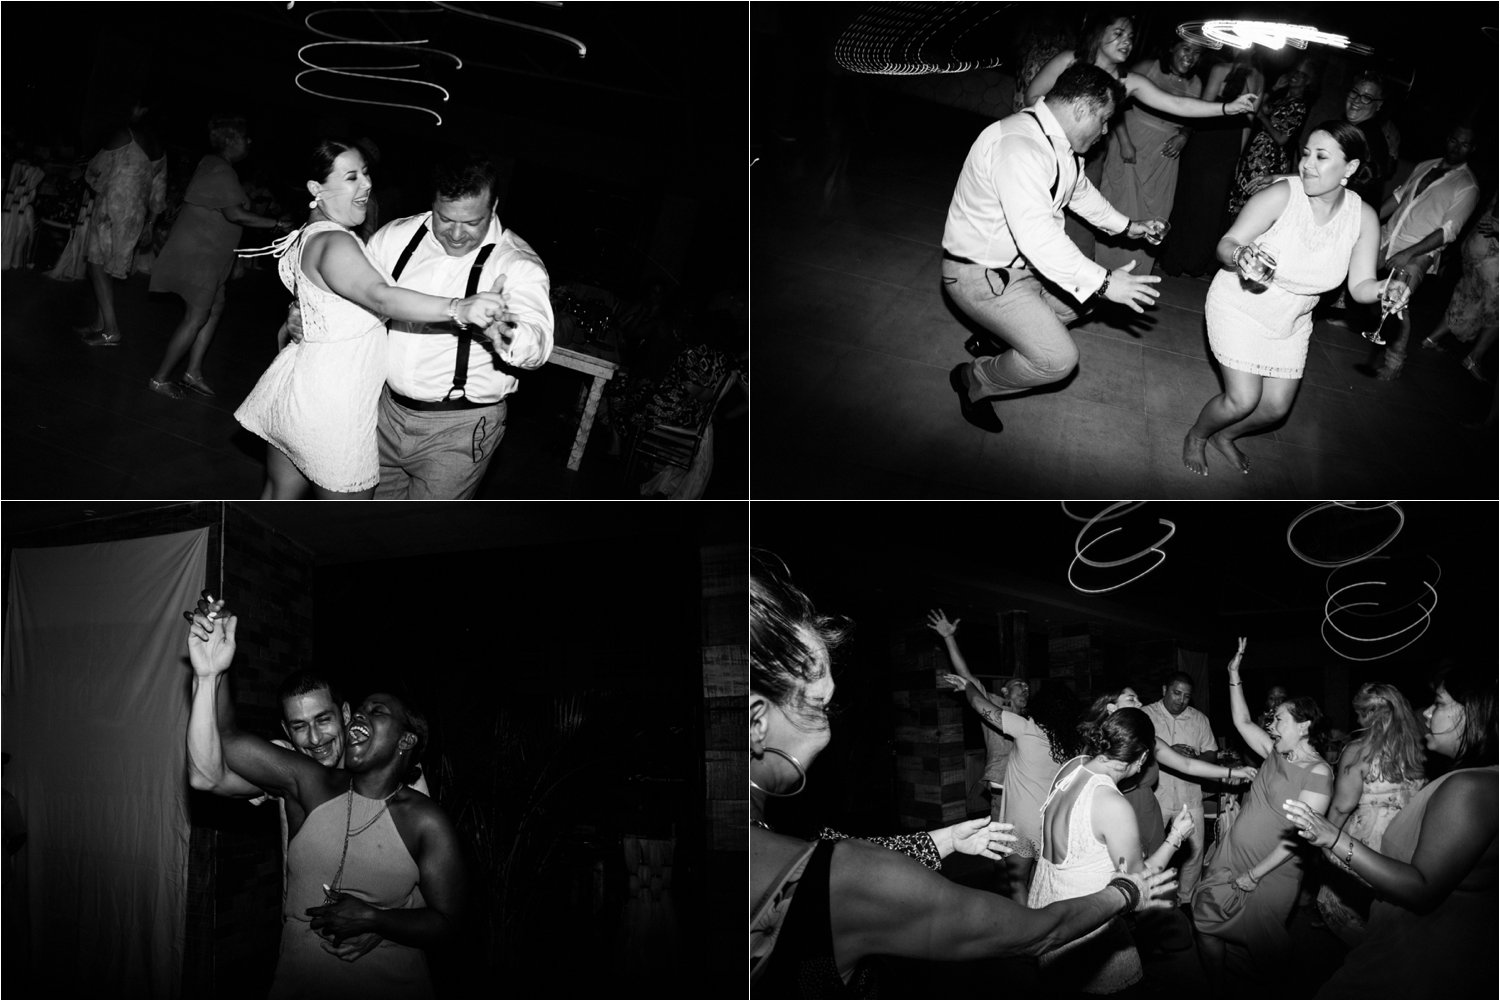  images by feliciathephotographer.com | destination wedding photographer | mexico | tropical | fiji | venue | azul beach resort | riviera maya | reception | dance floor | party | celebration | bride and groom | guests | friends and family | black and white | 